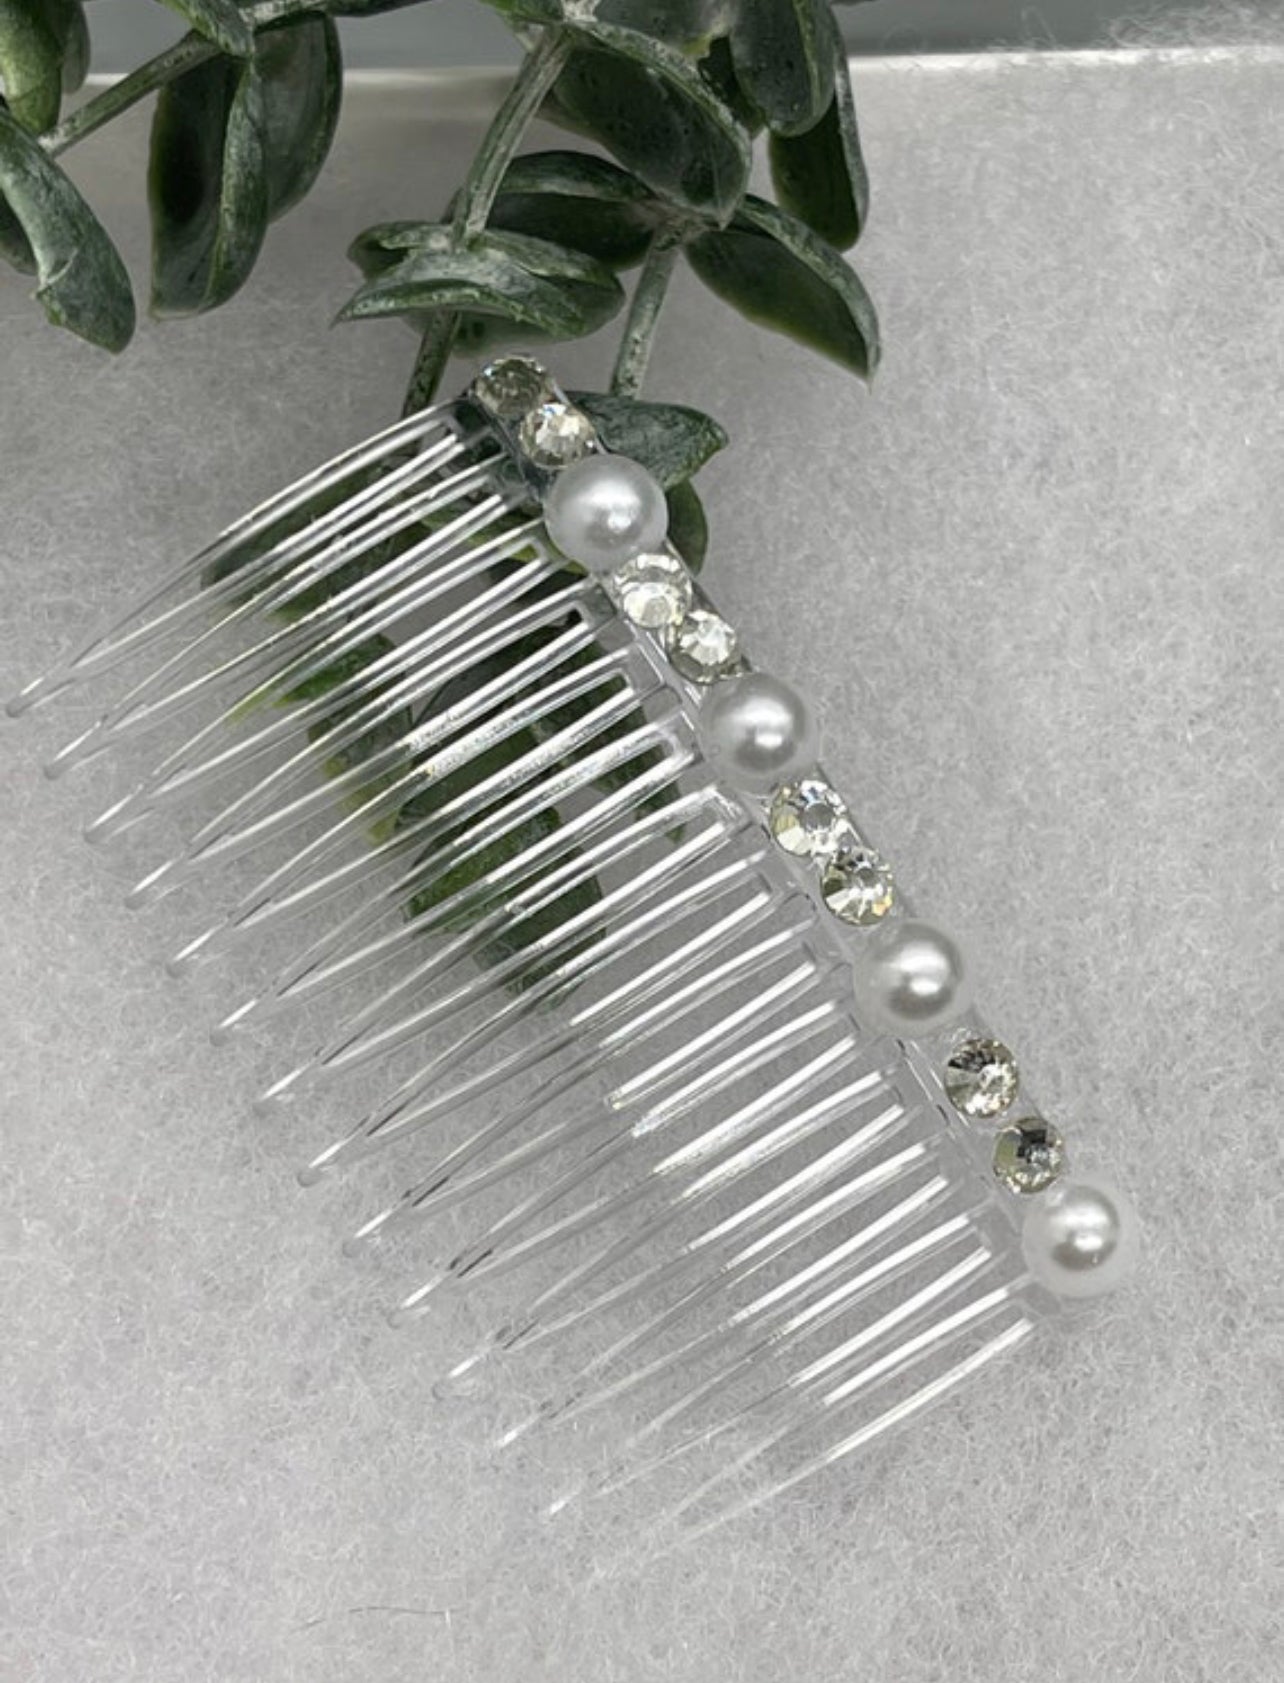 White bridal crystal Rhinestone Pearl hair comb accessory side Comb 3.5” clear plastic side Comb #009